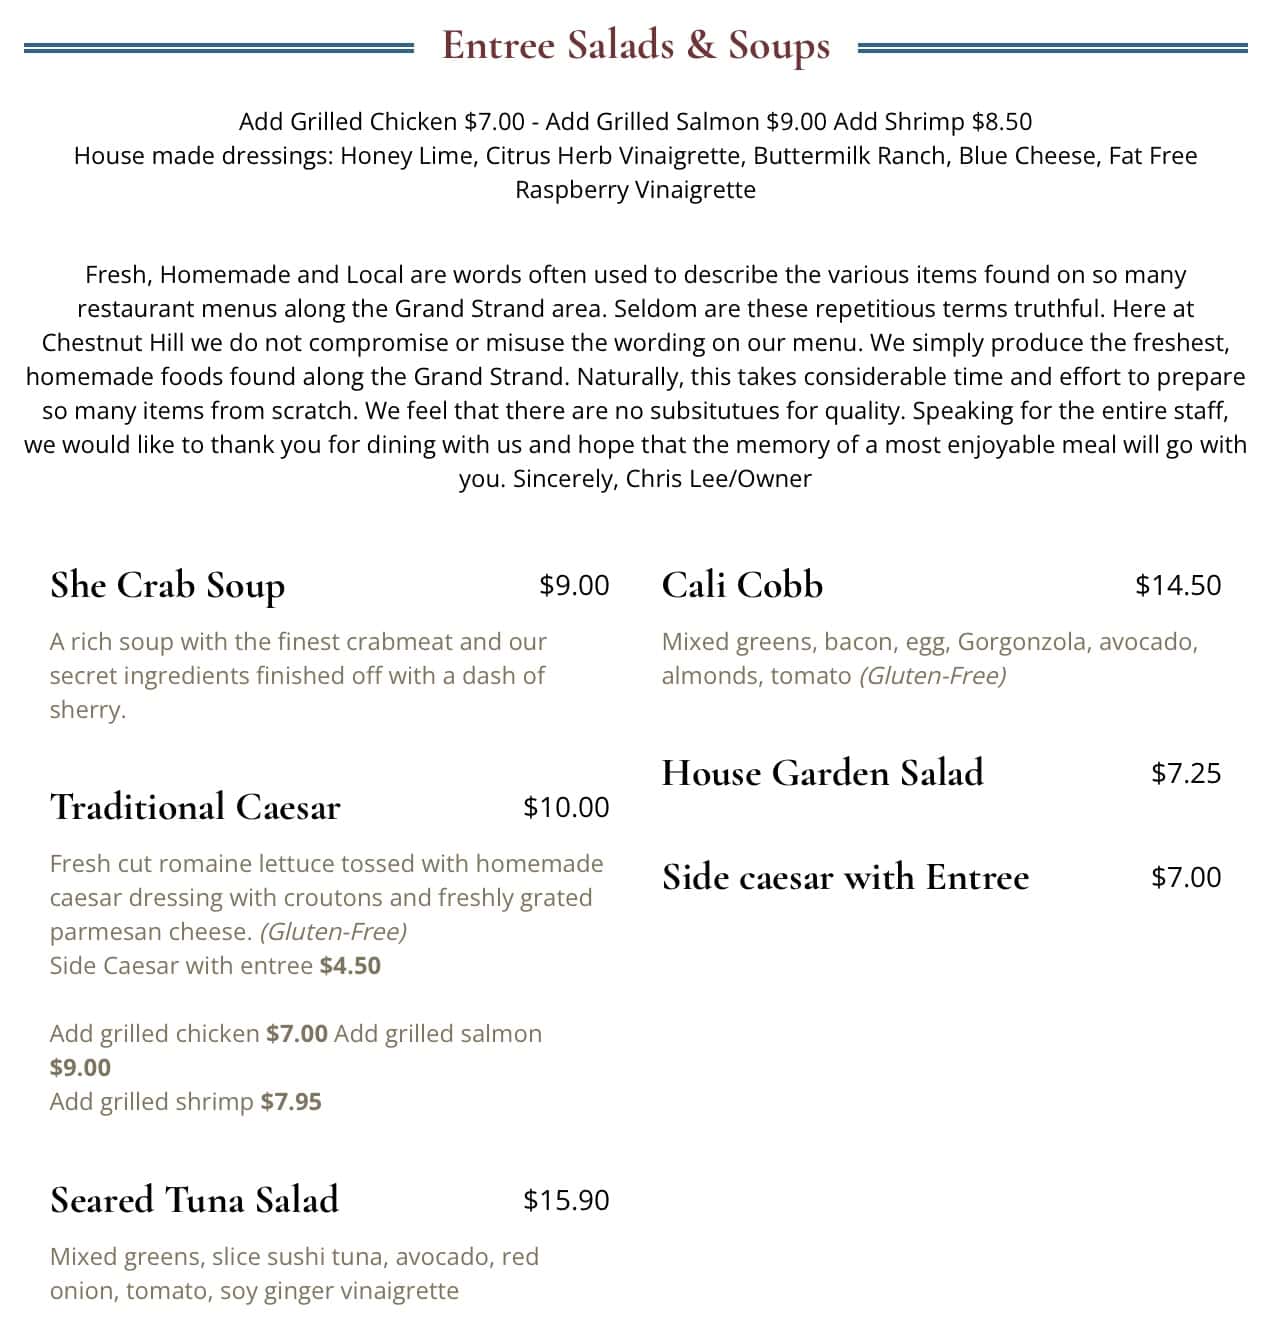 Chestnut Hill Entree Soups and Salads Menu